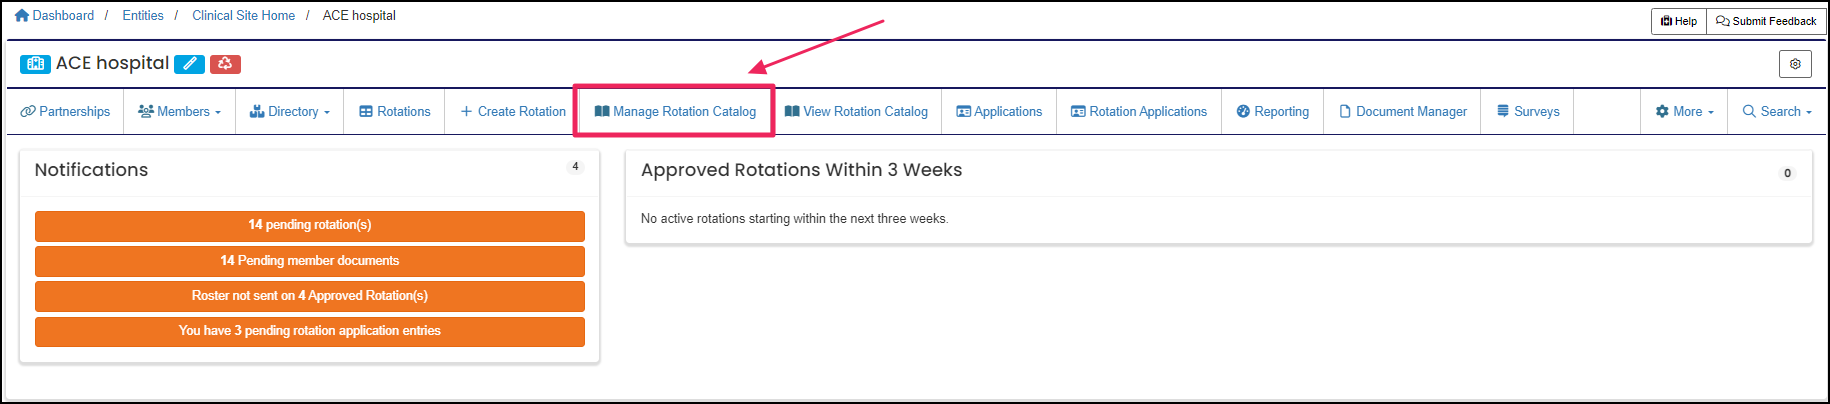 Manage rotation catalog button on clinical site home page.